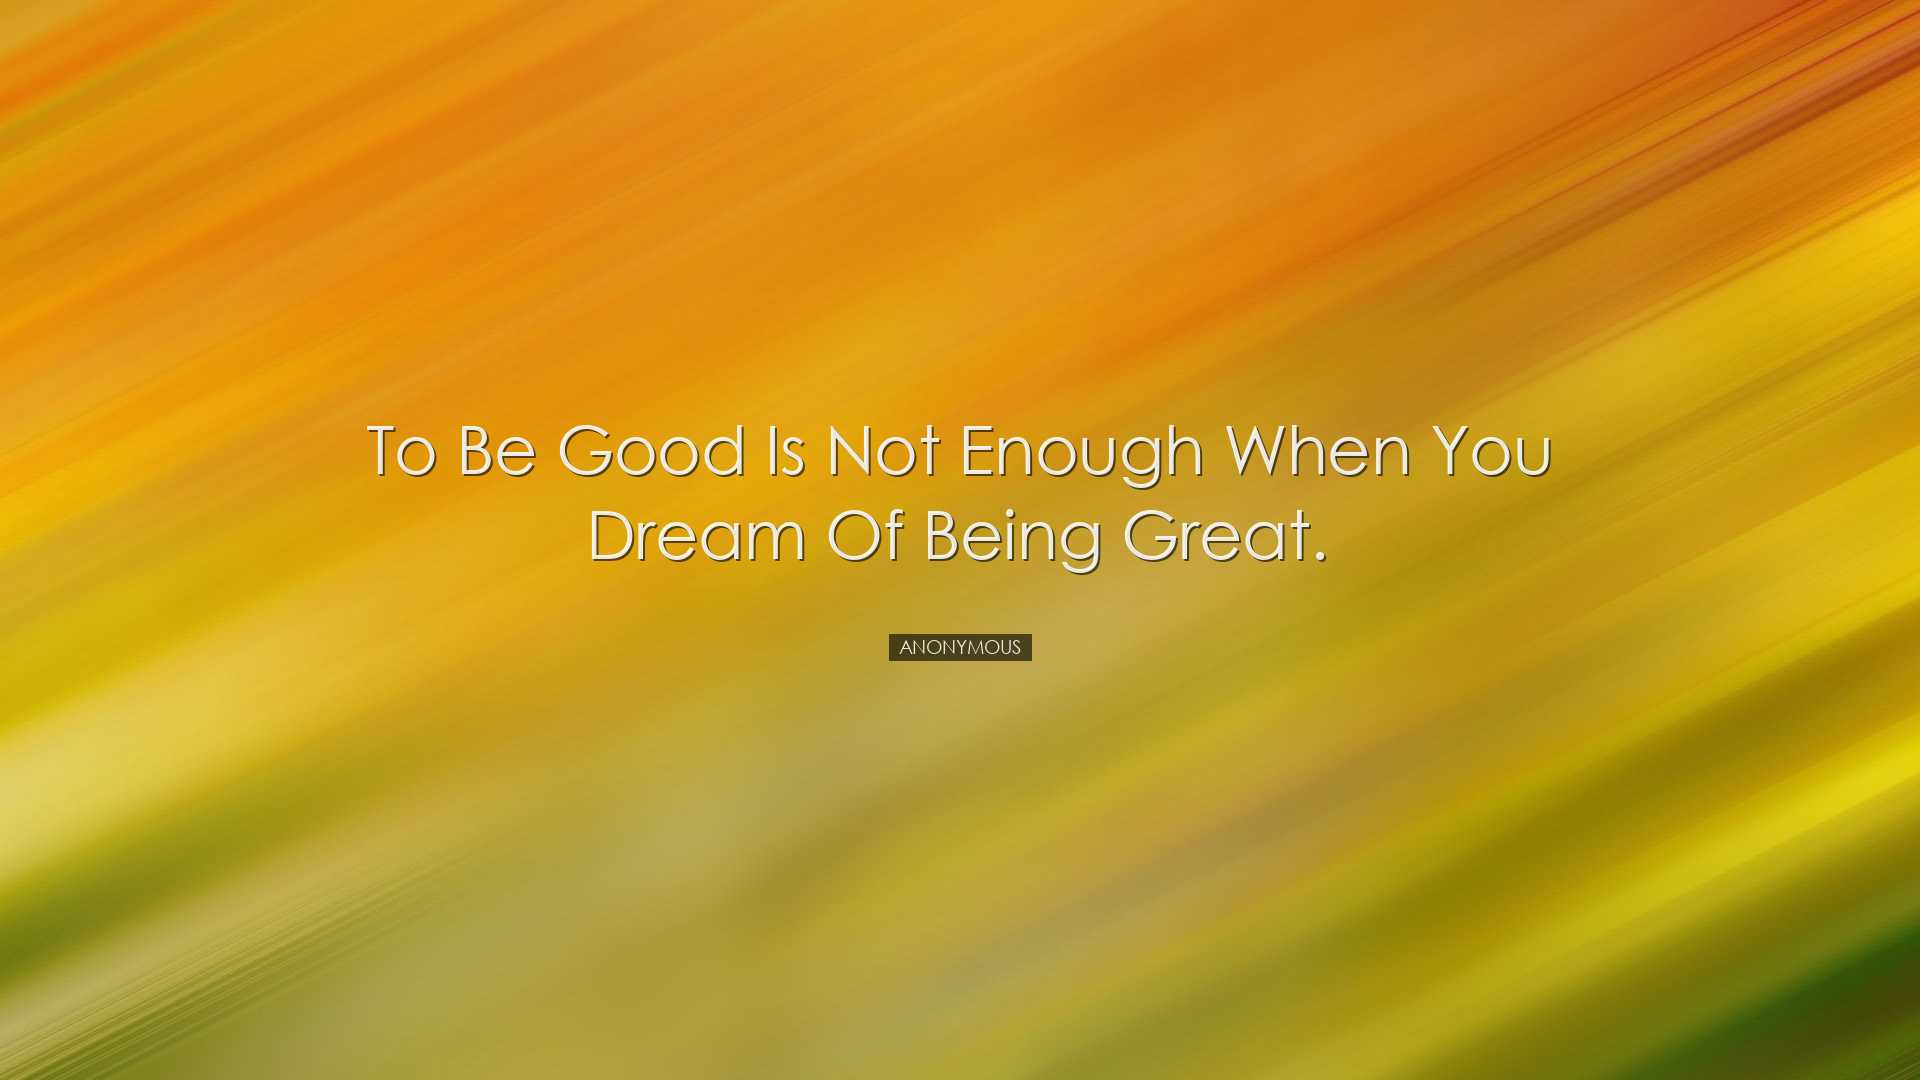 To be good is not enough when you dream of being great. - Anonymou